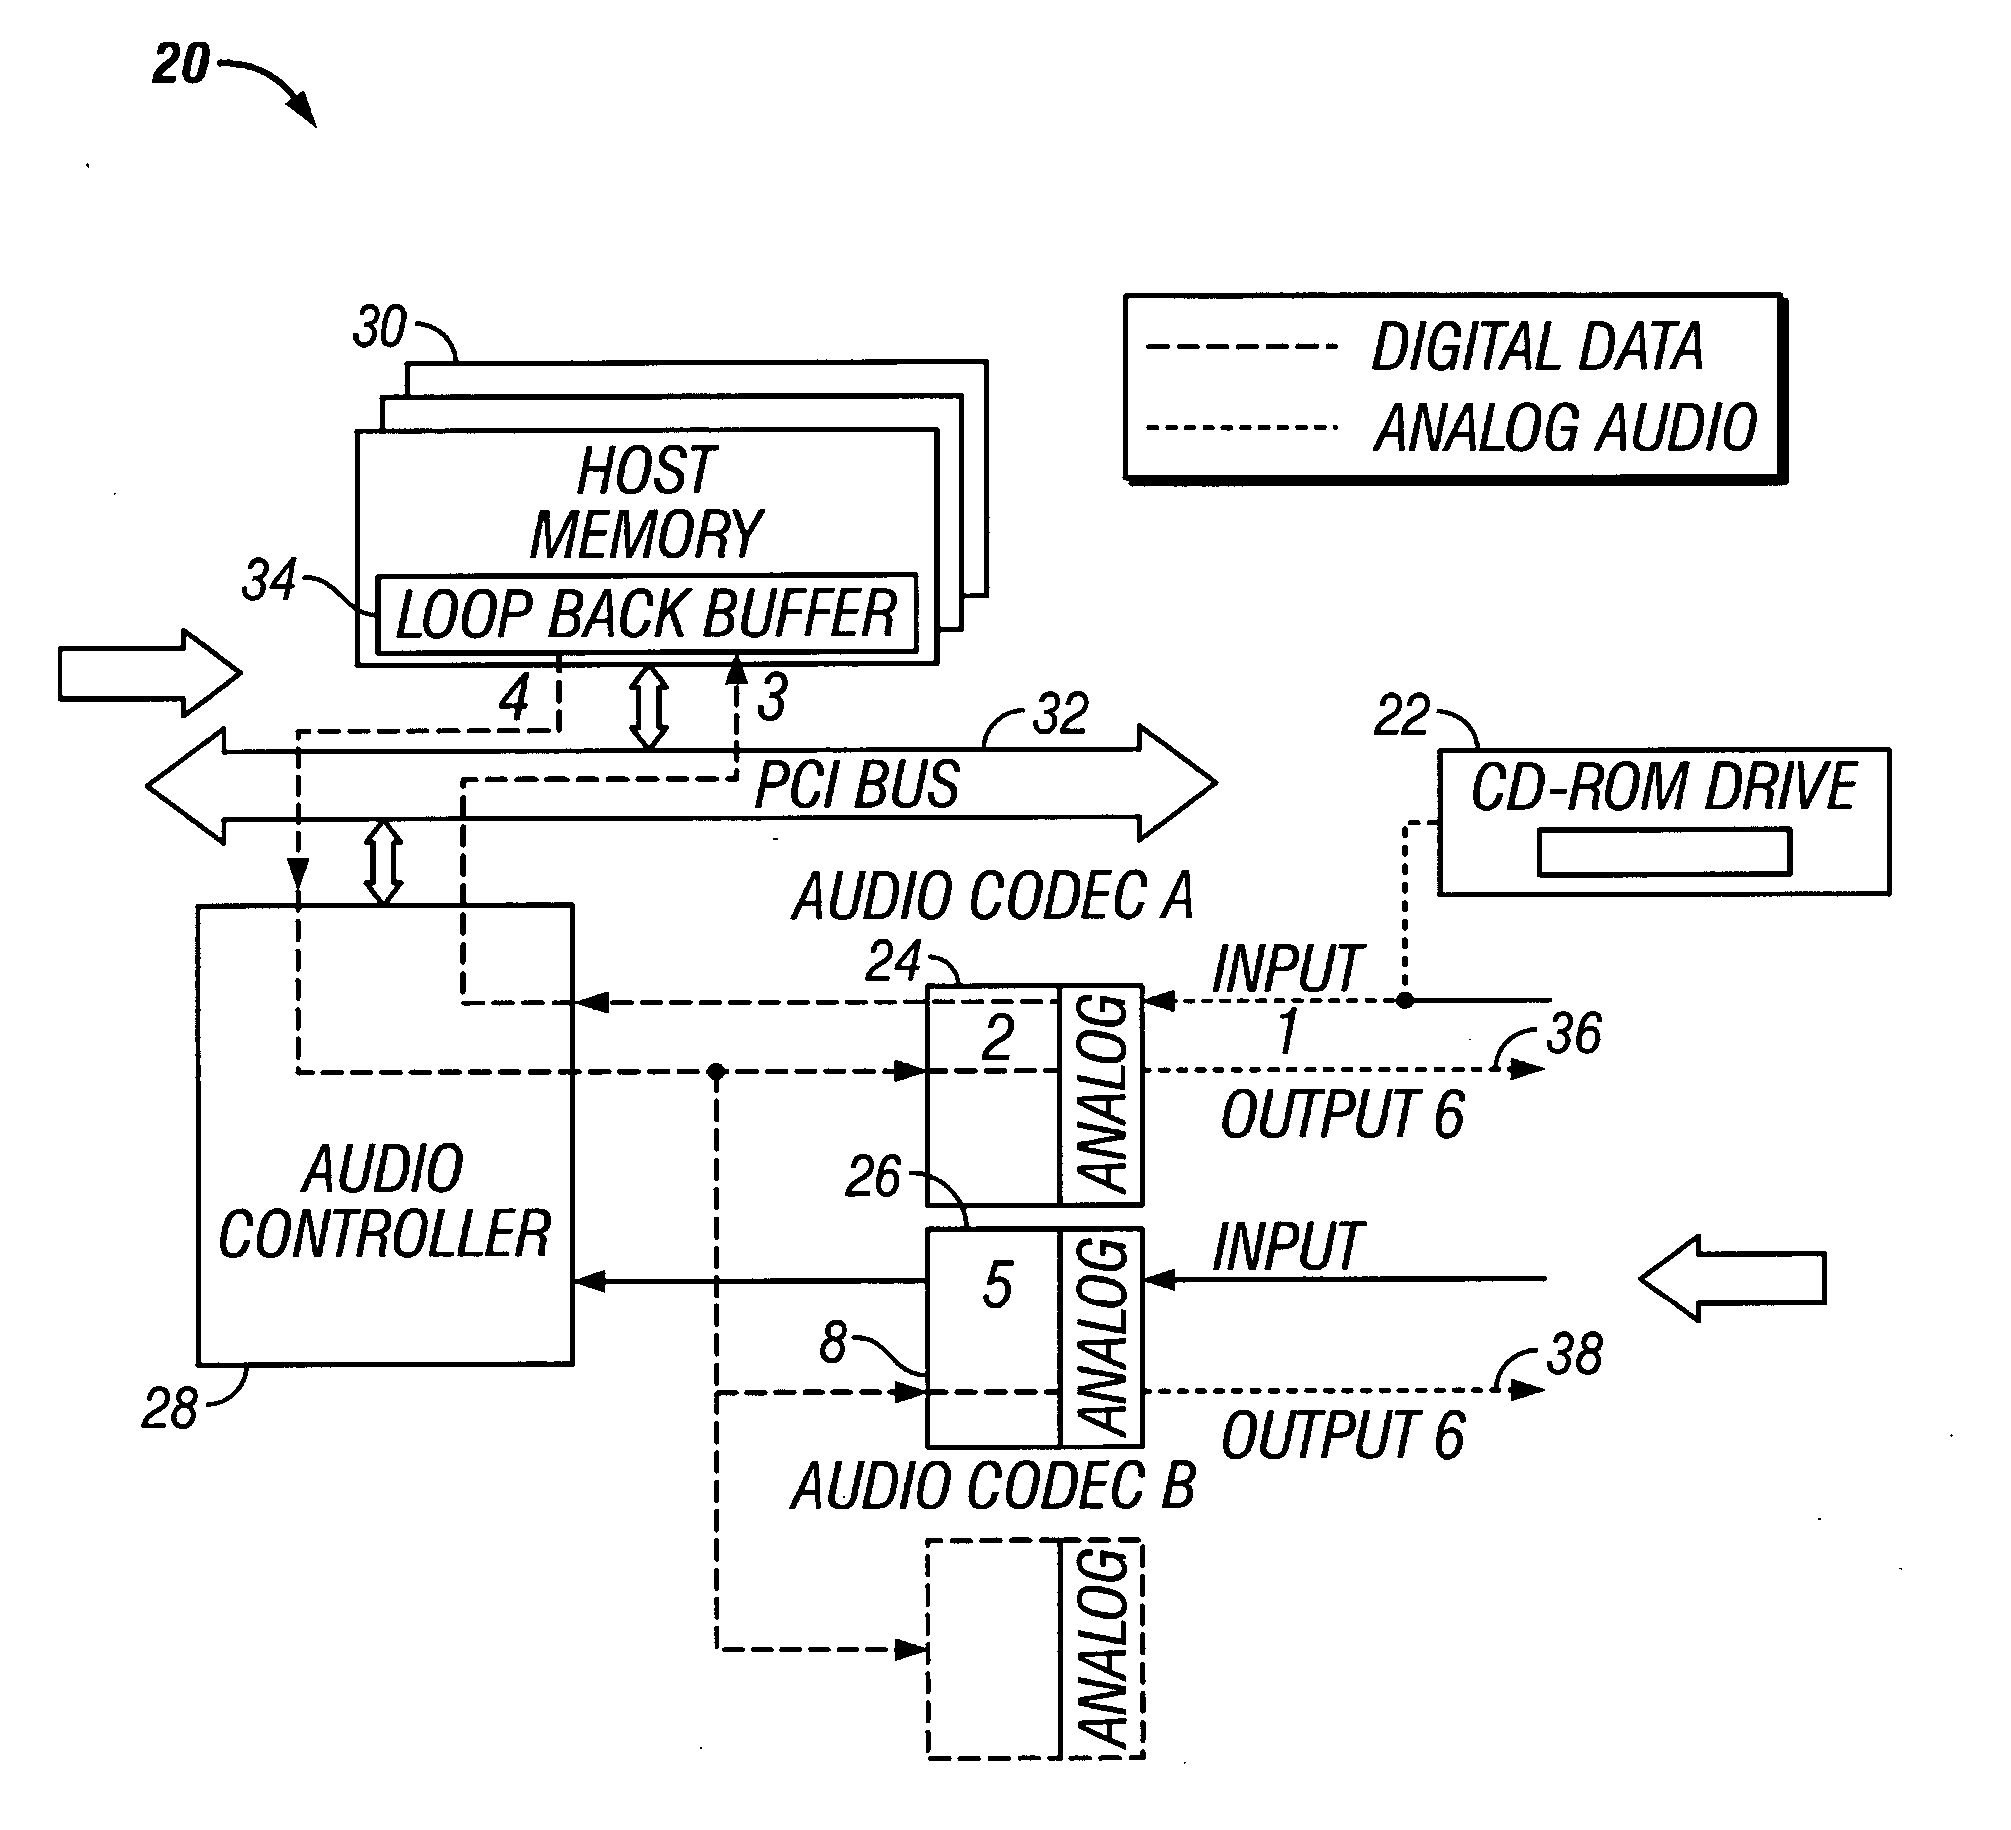 Method and apparatus for playing analog audio to multiple codec outputs